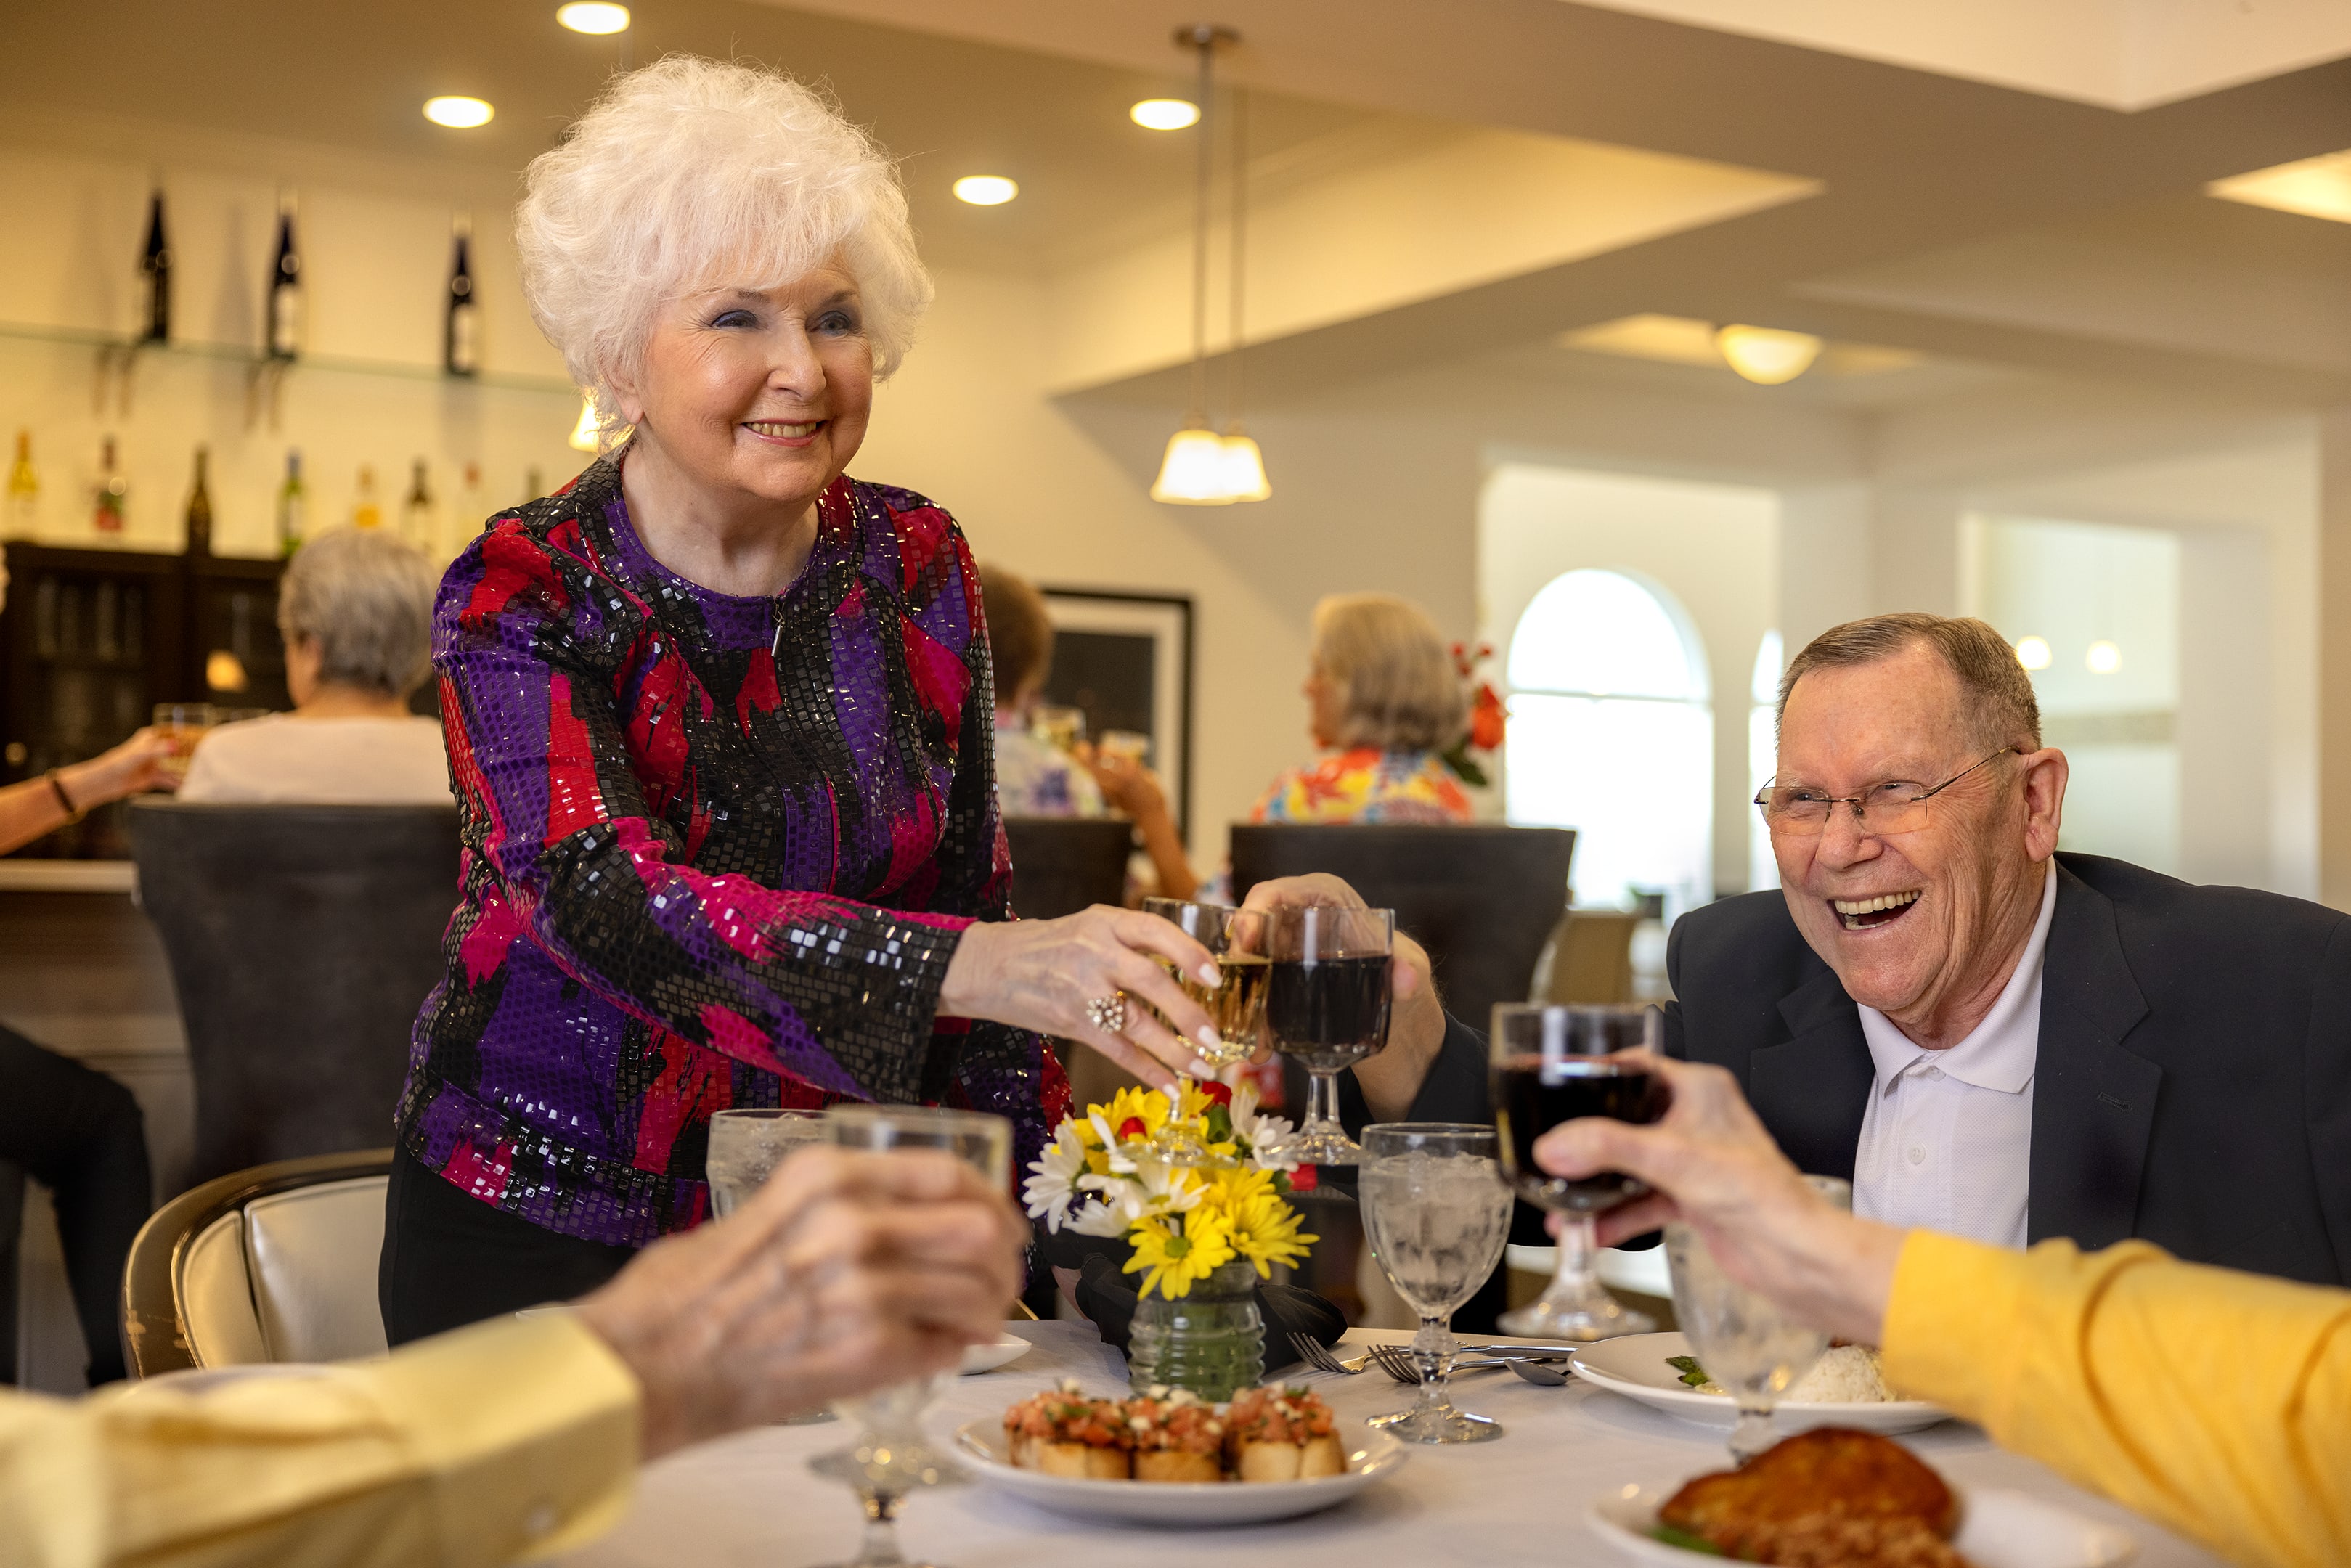 Residents in the dining hall at The Blake at Township in Ridgeland, Mississippi